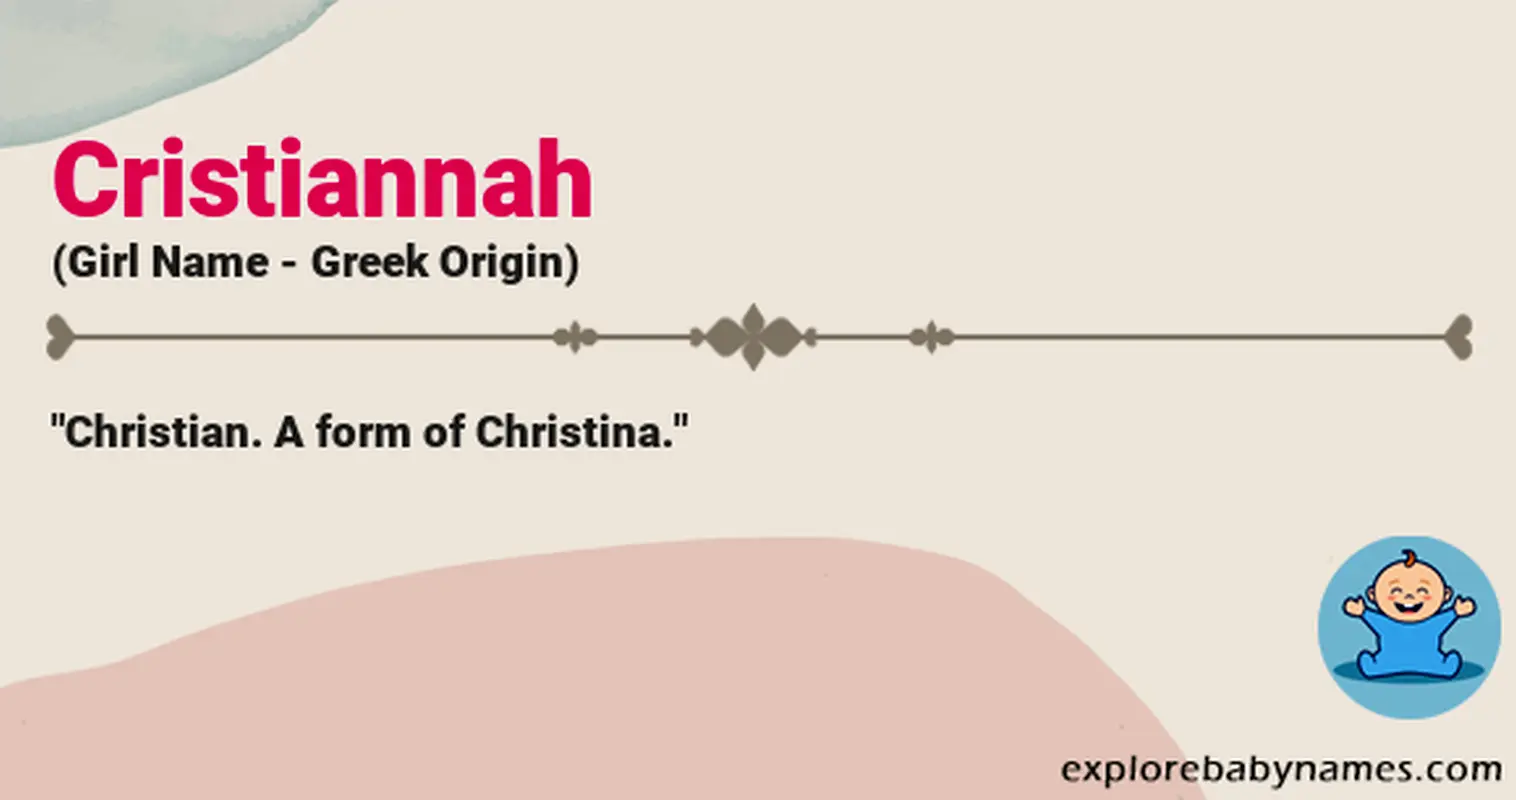 Meaning of Cristiannah